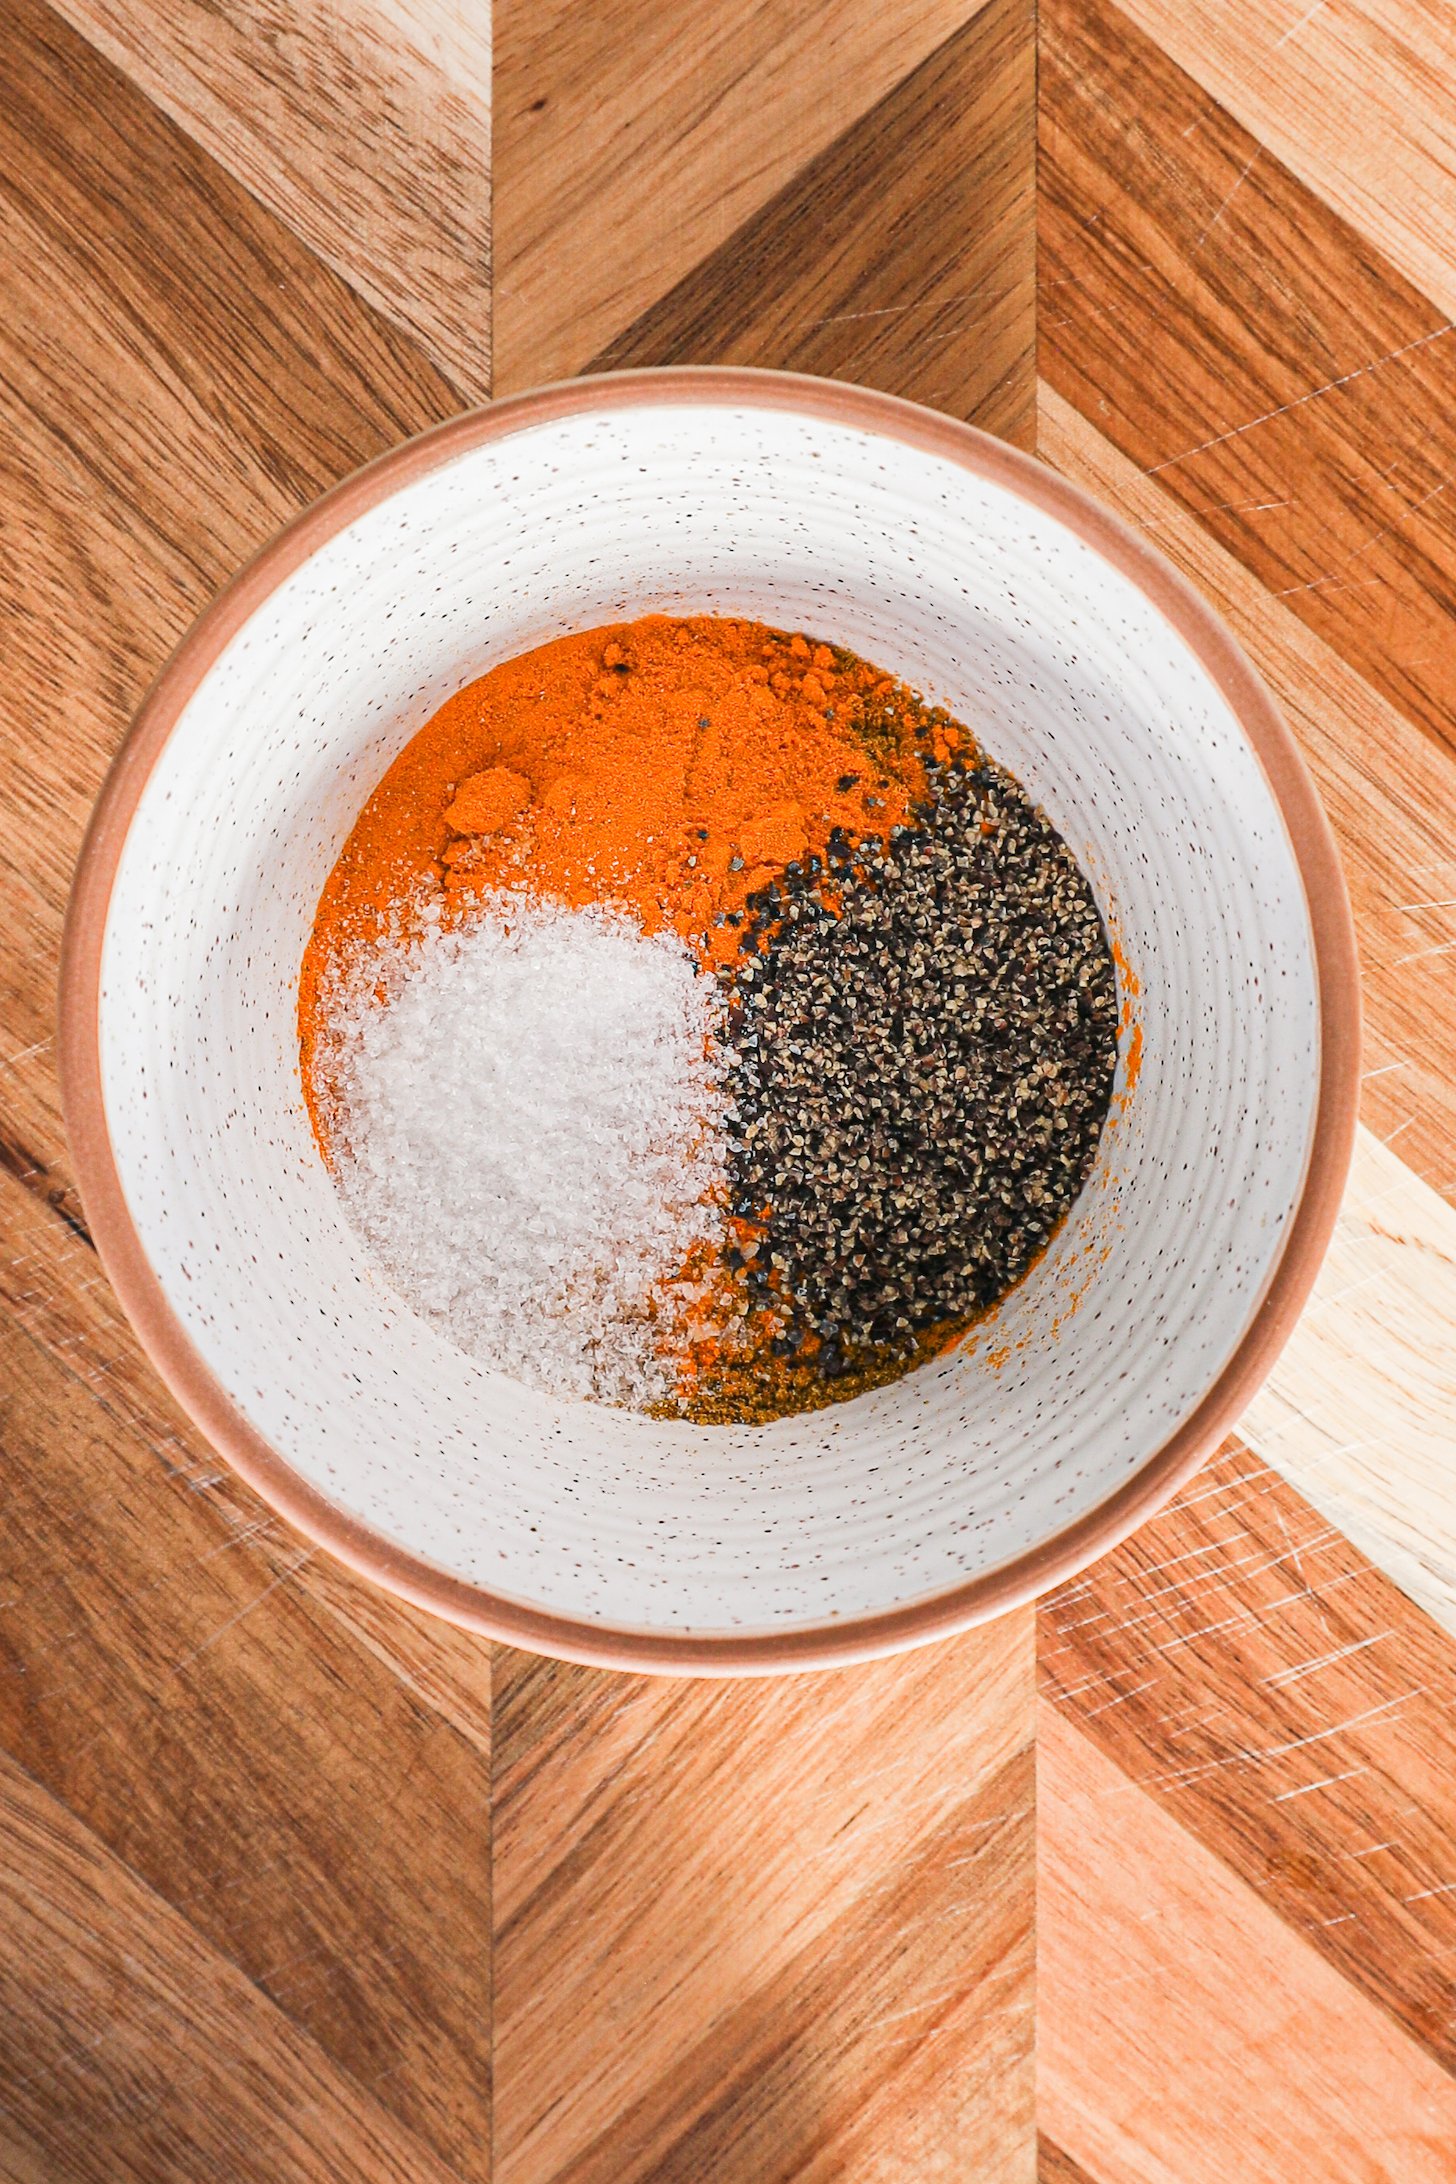 A bowl contaning a yellow spice, salt and pepper.